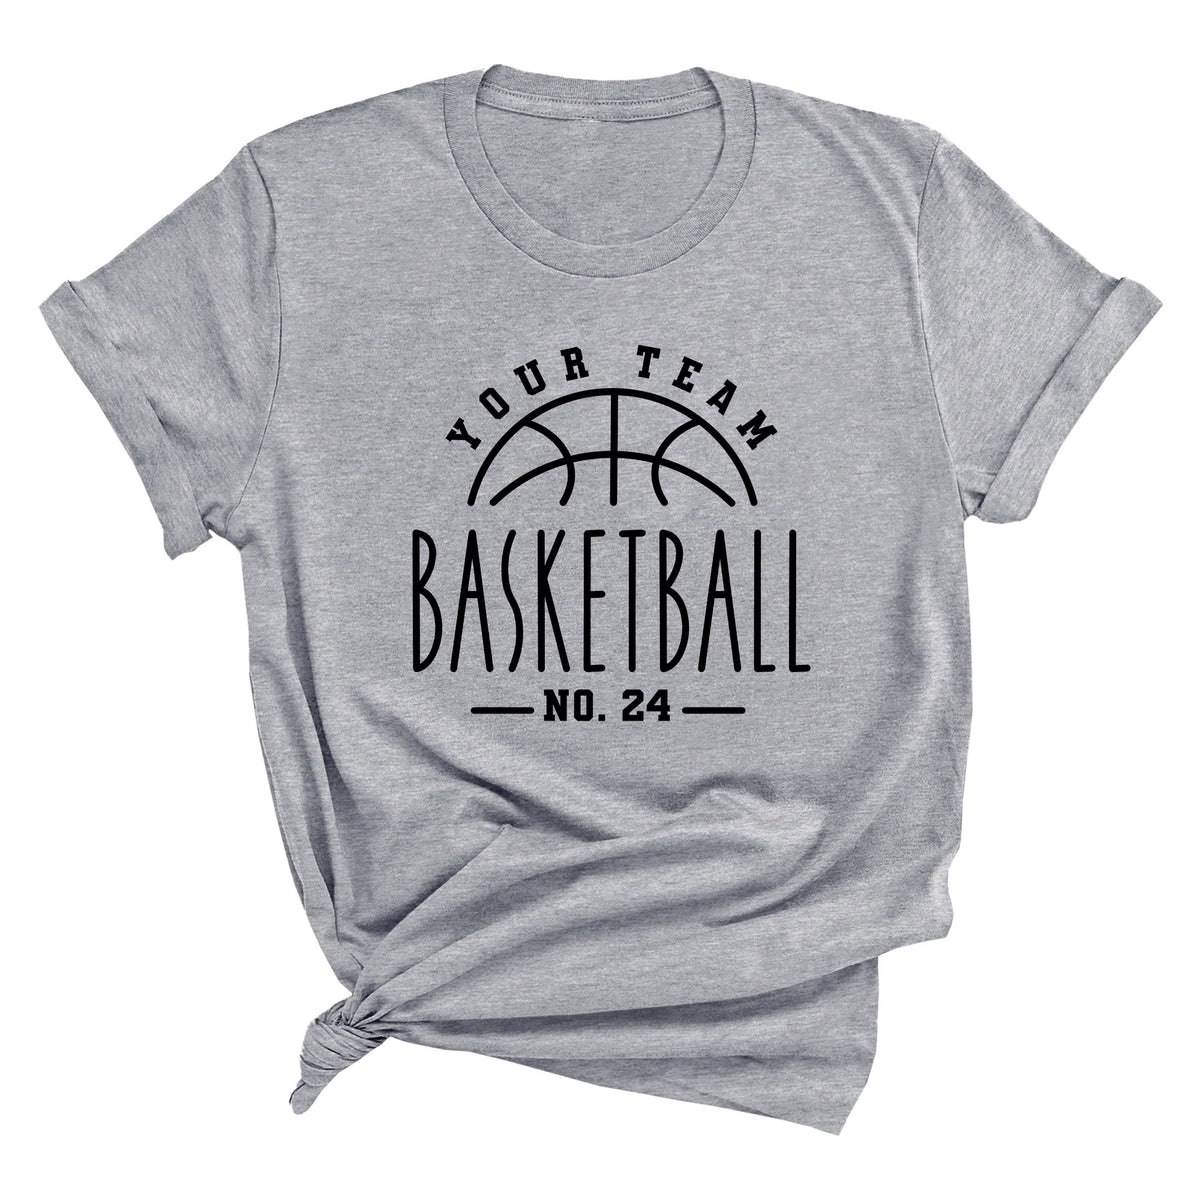 Your Team Basketball with Custom Number (Skinny Text) Unisex T-Shirt